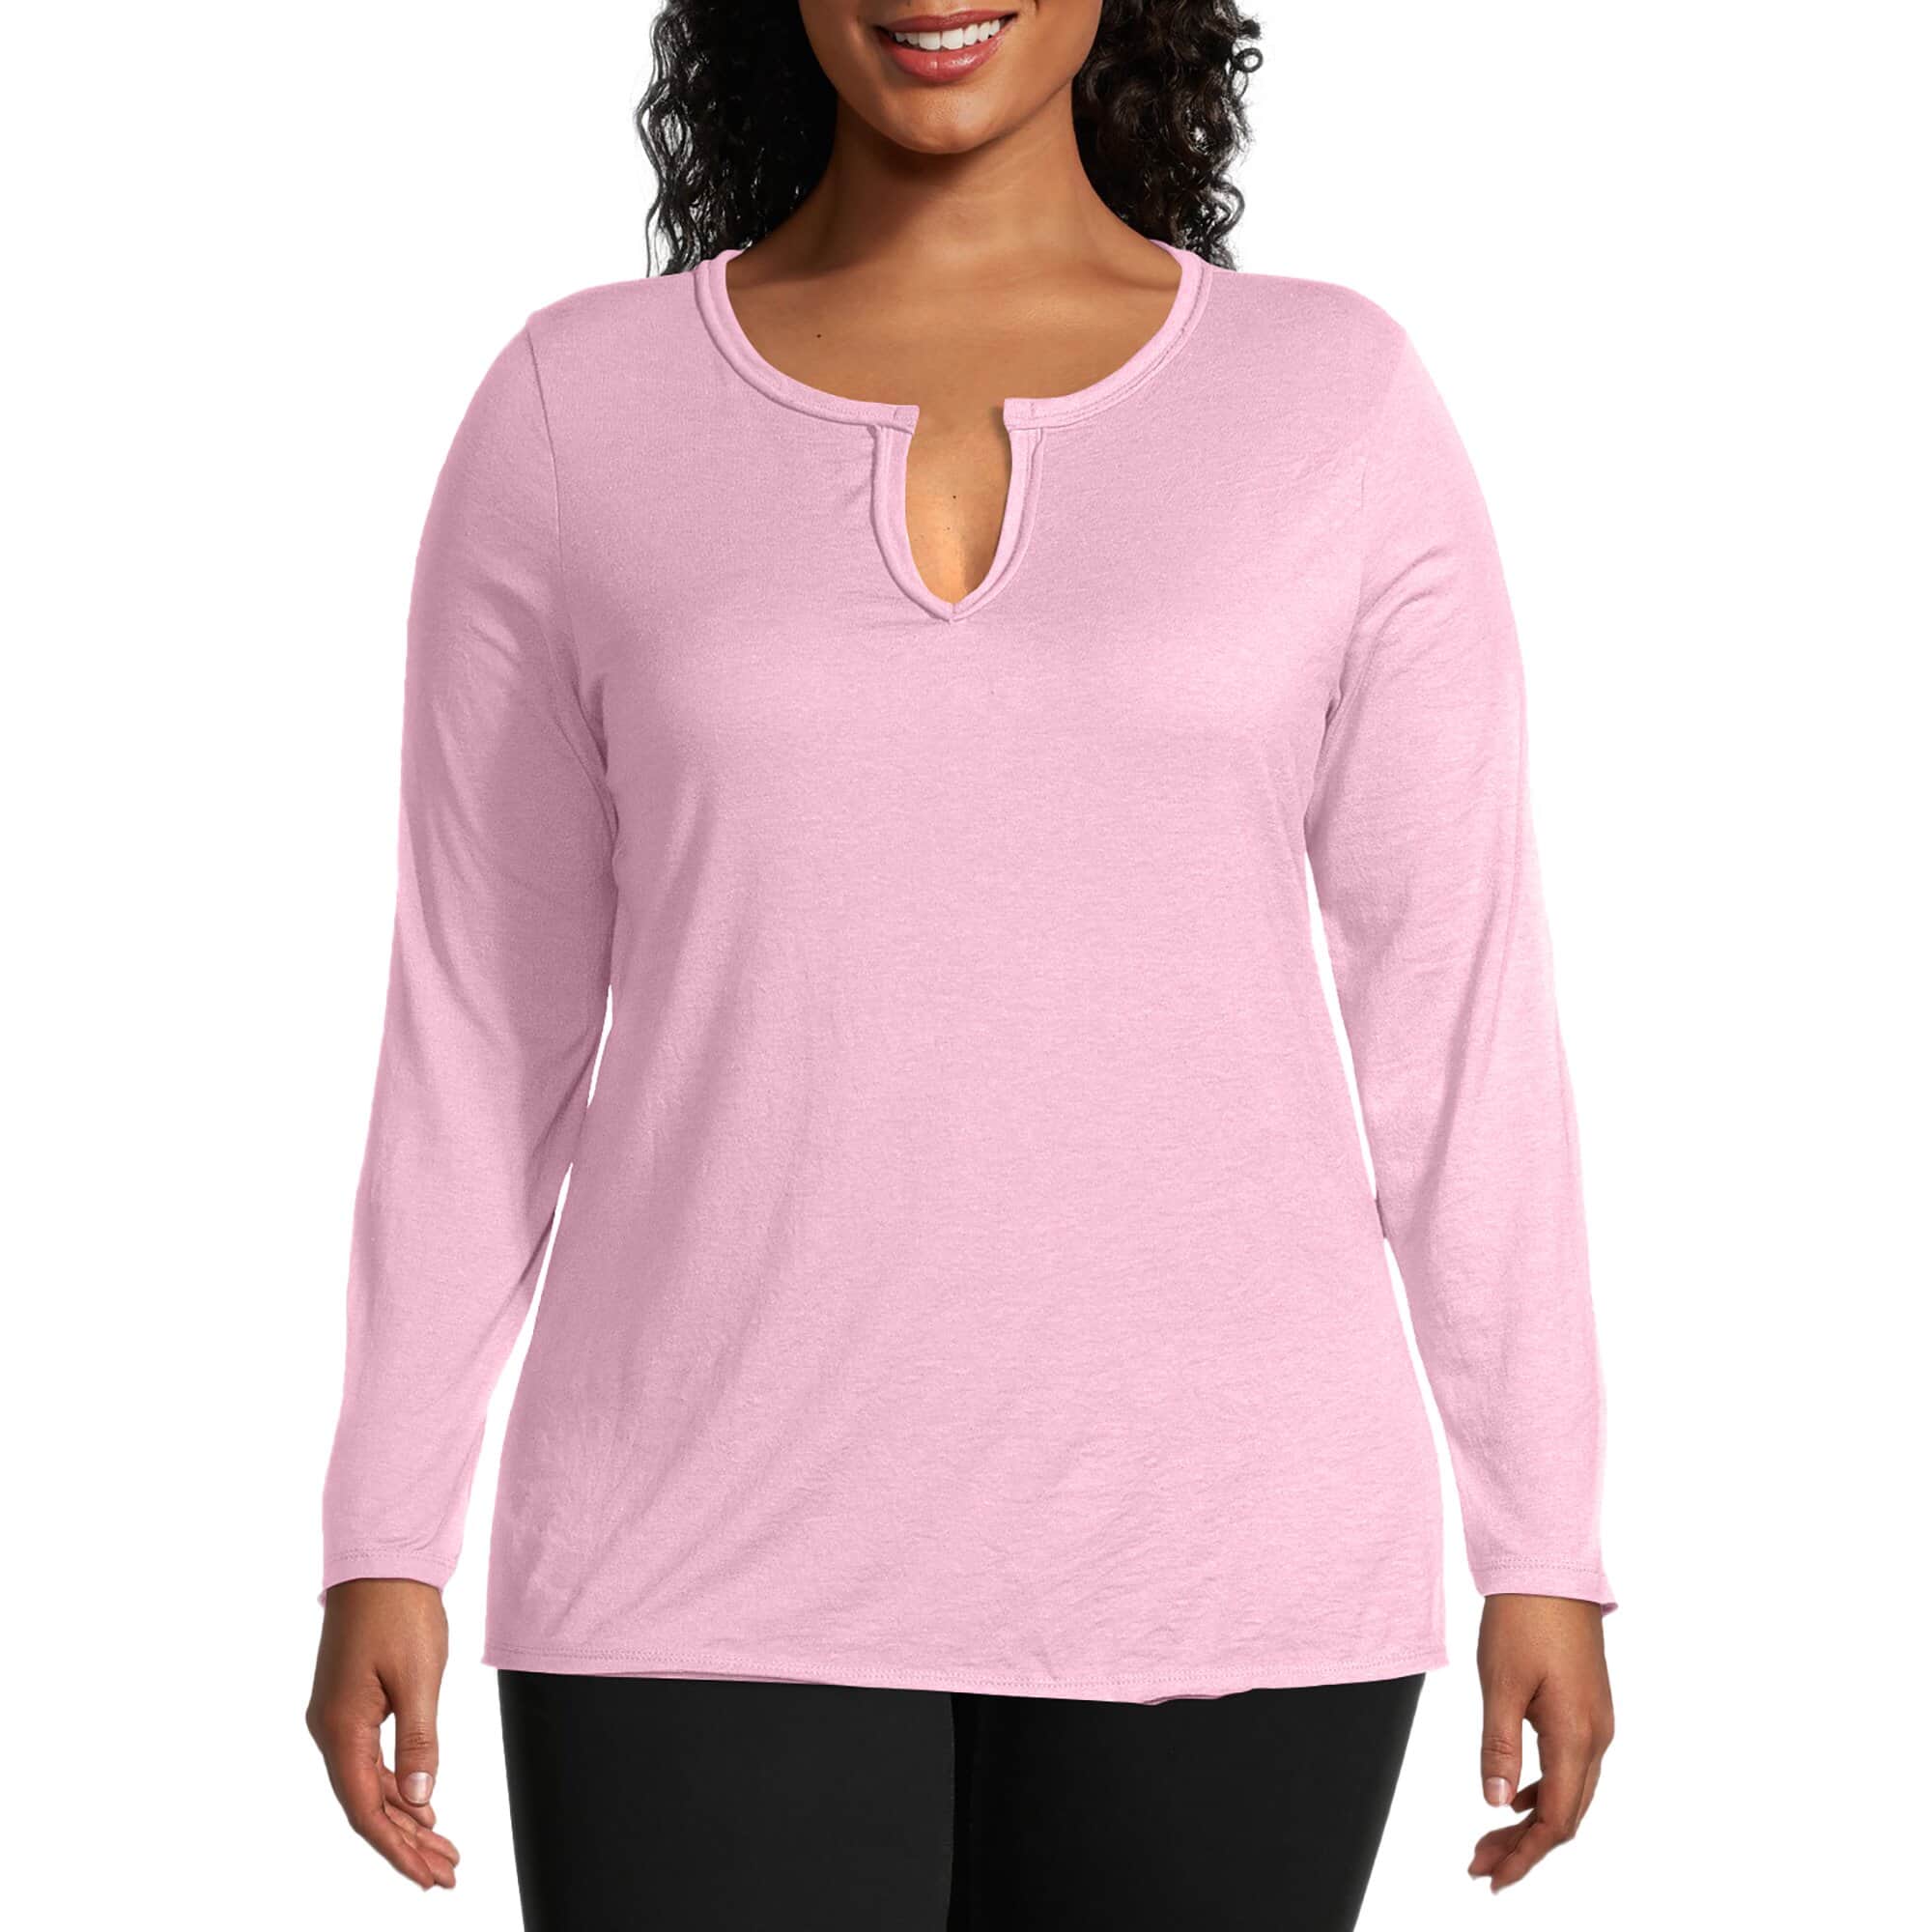 3 Pack - Hanes Just My Size Long Sleeve T-Shirts - Fuchsia, Teal, Light  Pink (4X)